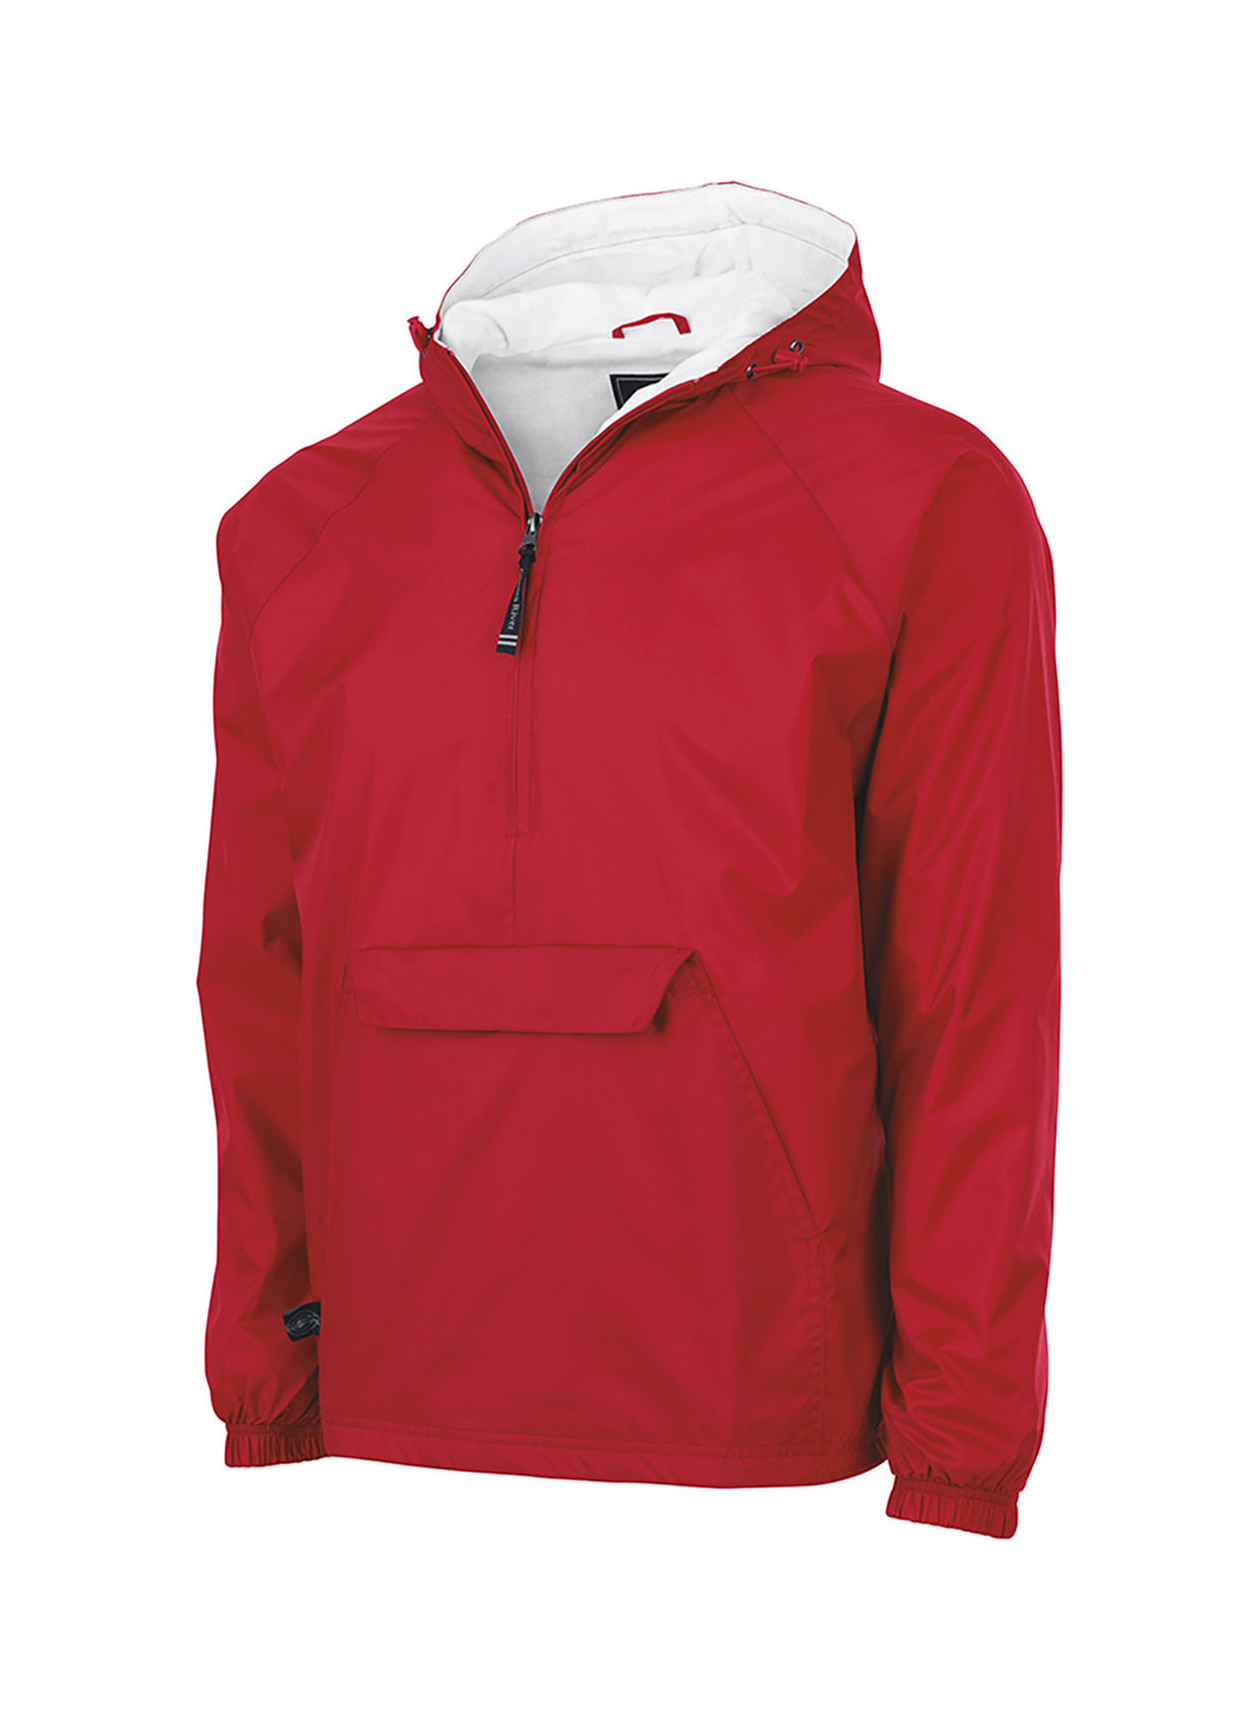 Charles River Men's Red Unisex Classic Pullover